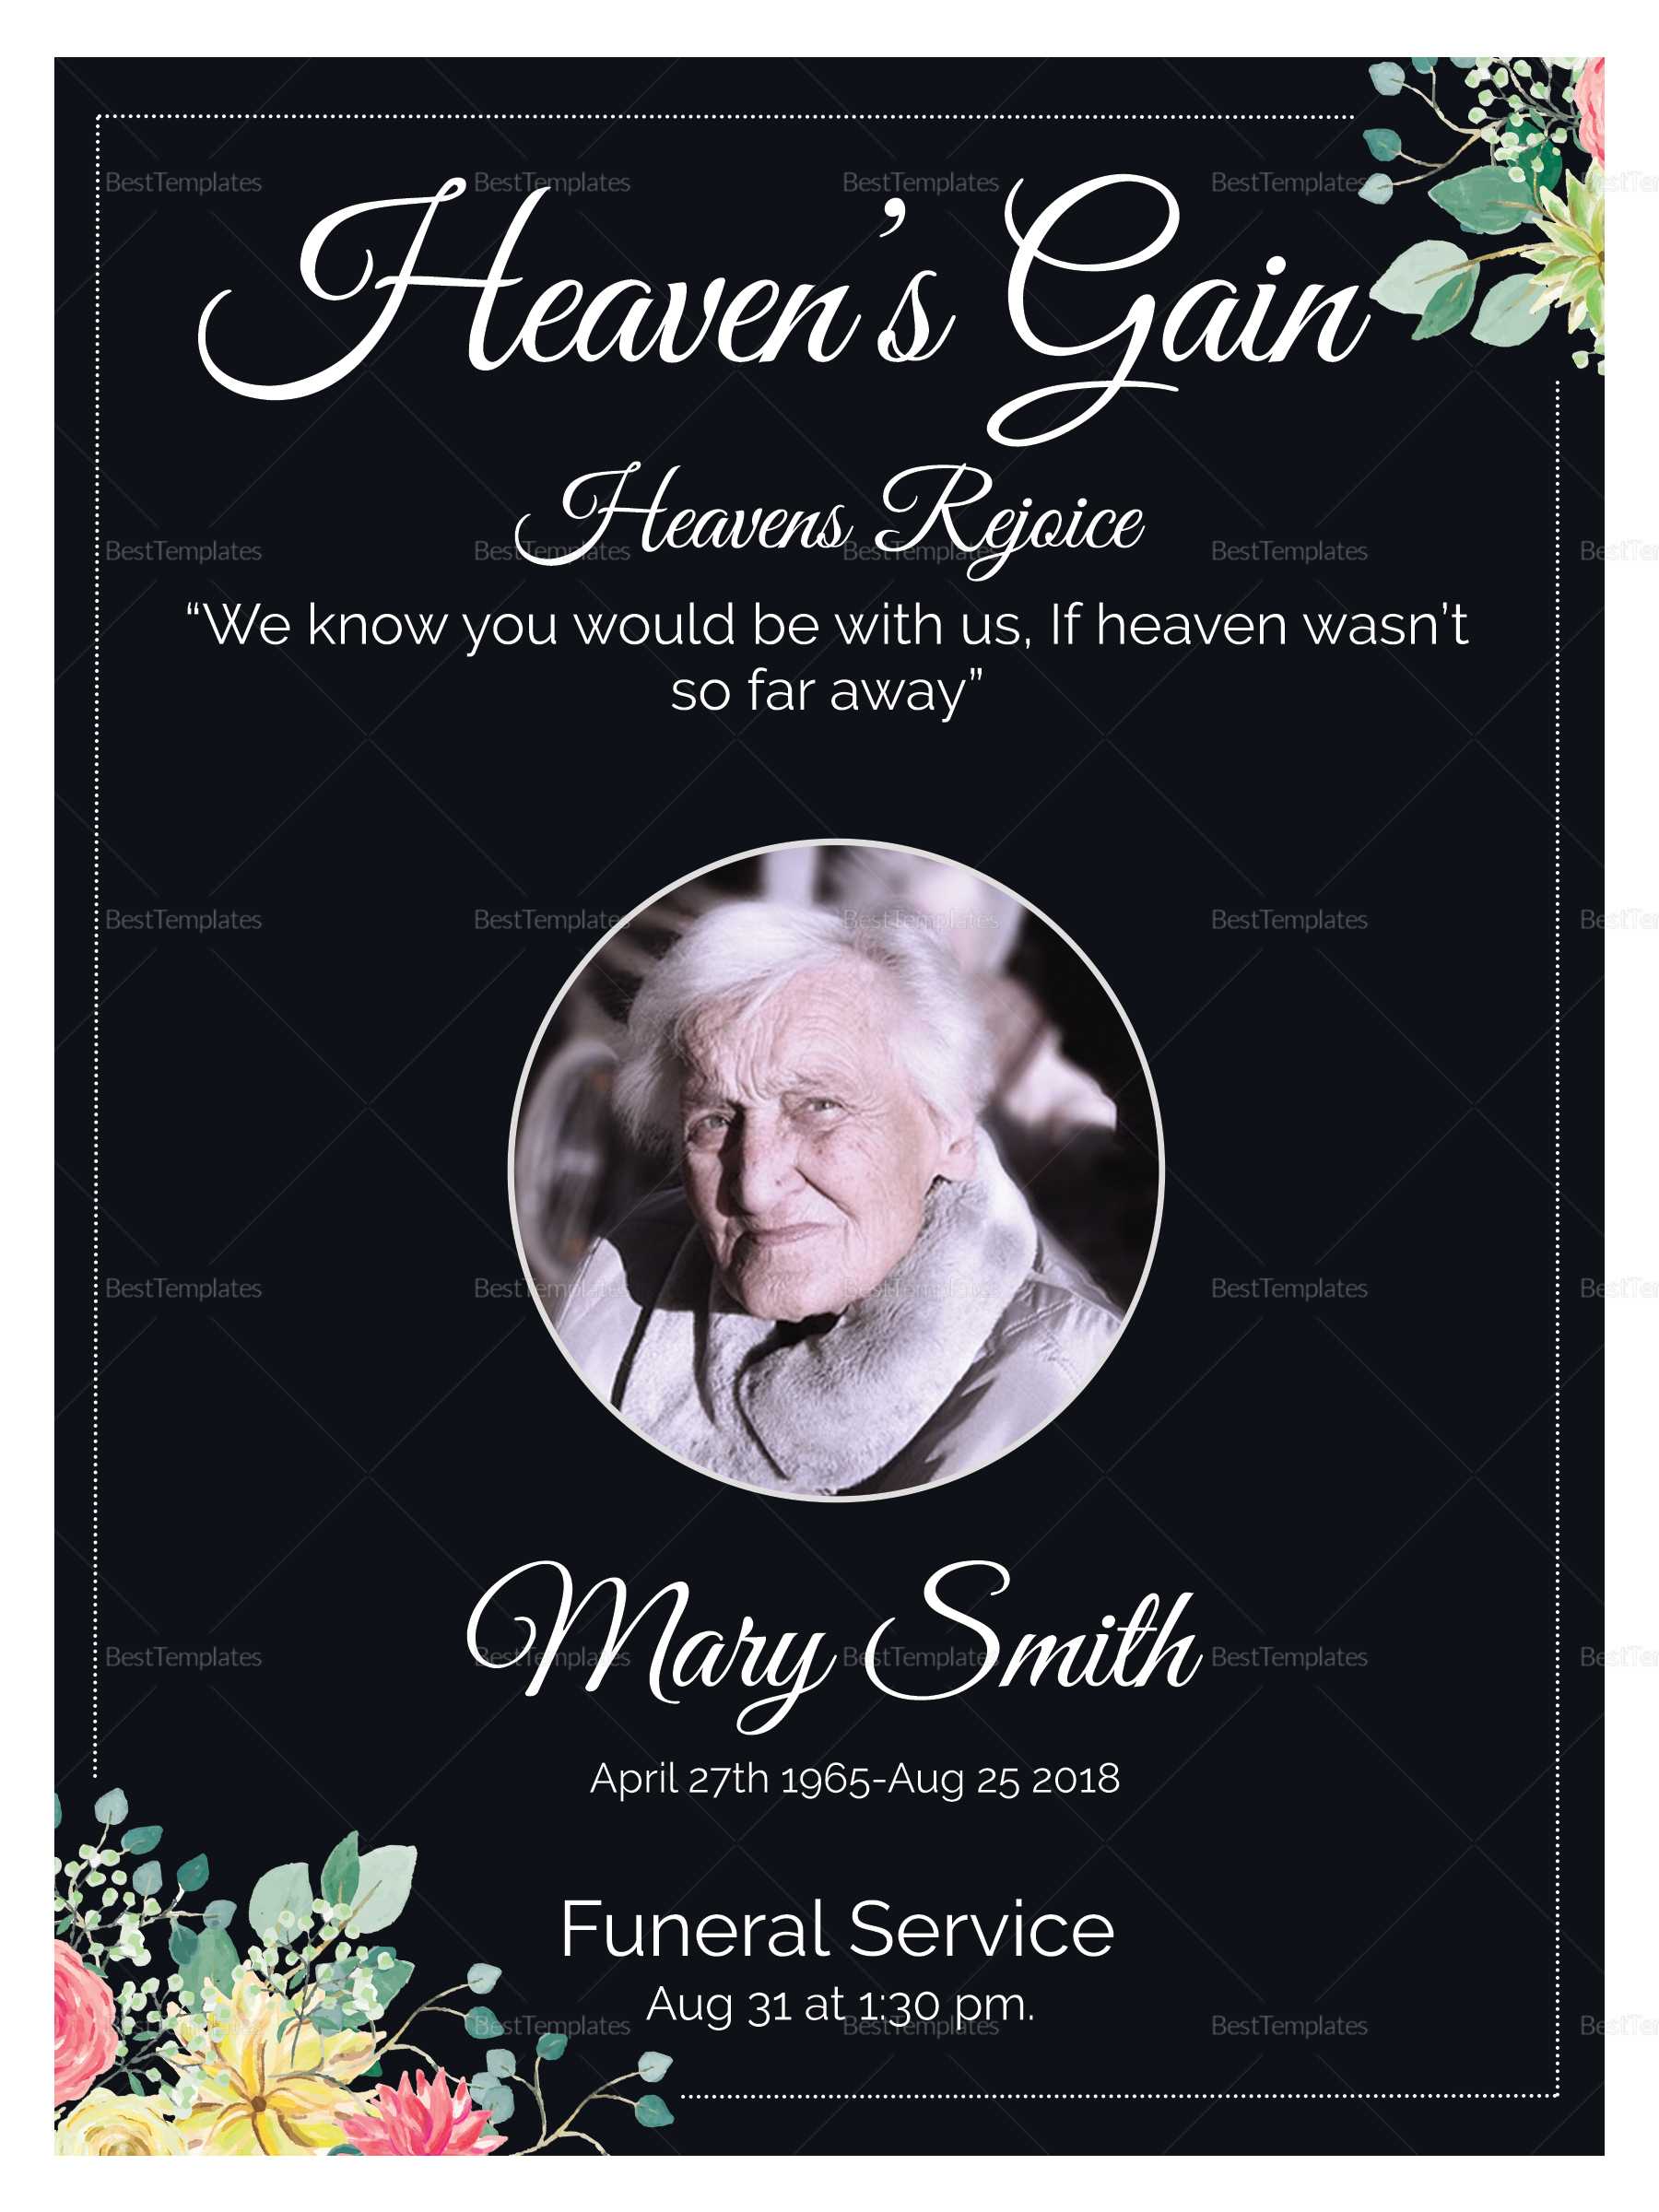 Eulogy Funeral Invitation Card Template Throughout Funeral Invitation Card Template